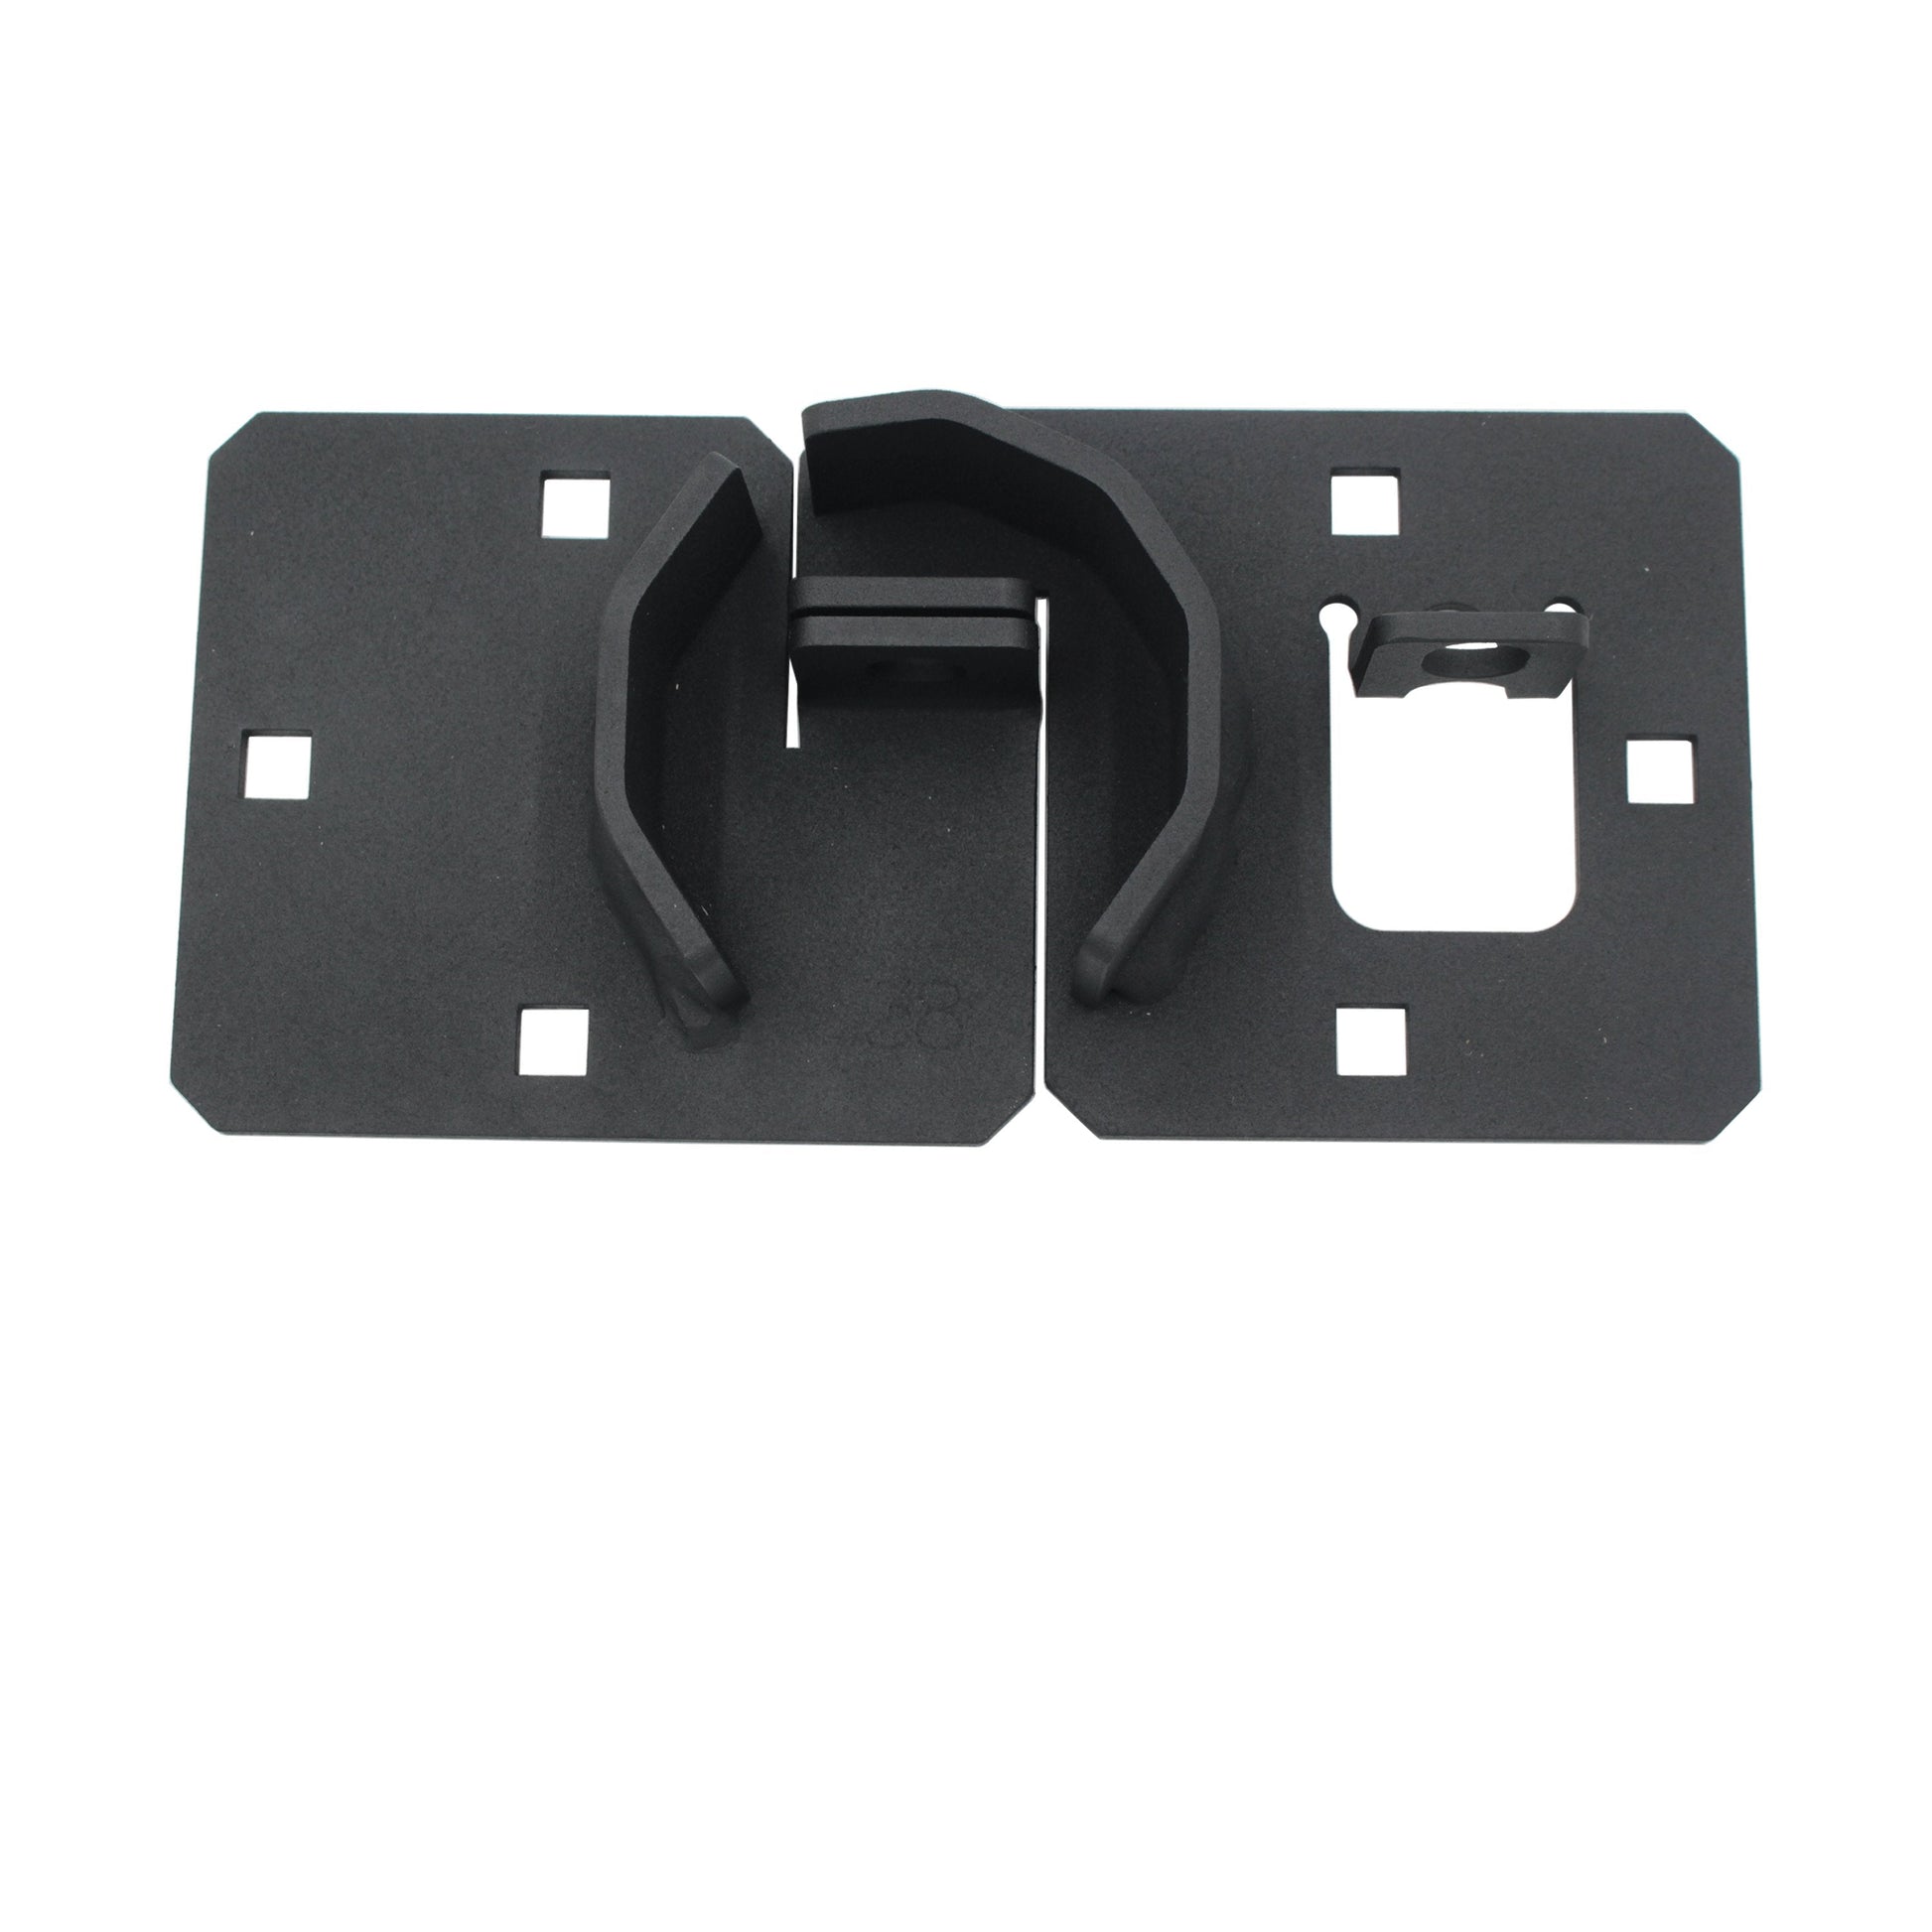 Puck Lock HASP Kit Model V2 Puck Locks Proven Industries Without Puck Lock (- 25.00) Keyed Differently 